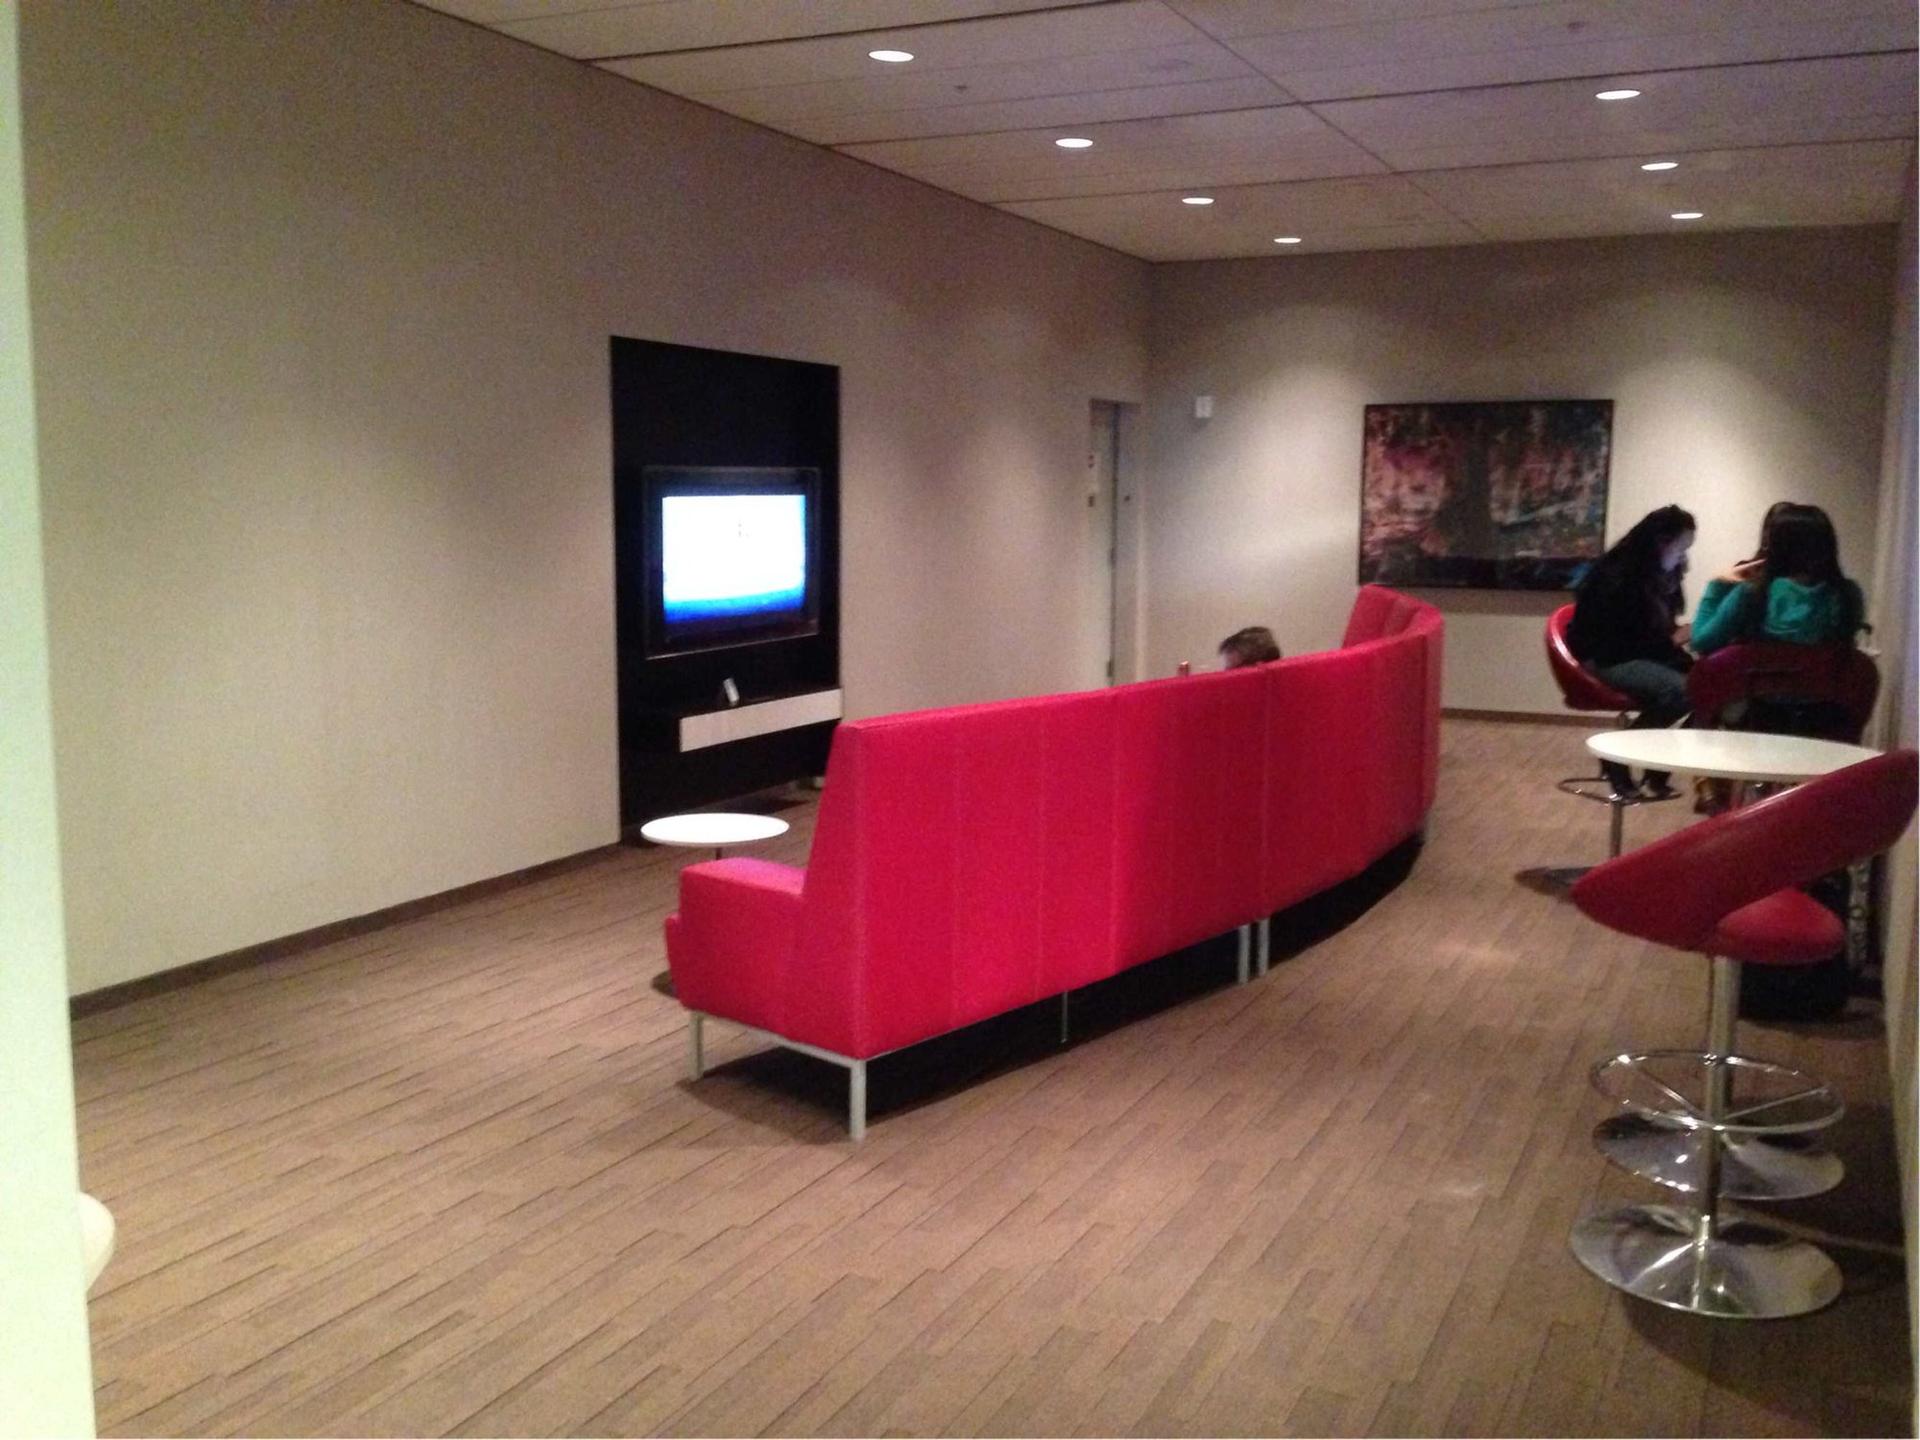 Air Canada Maple Leaf Lounge image 10 of 30